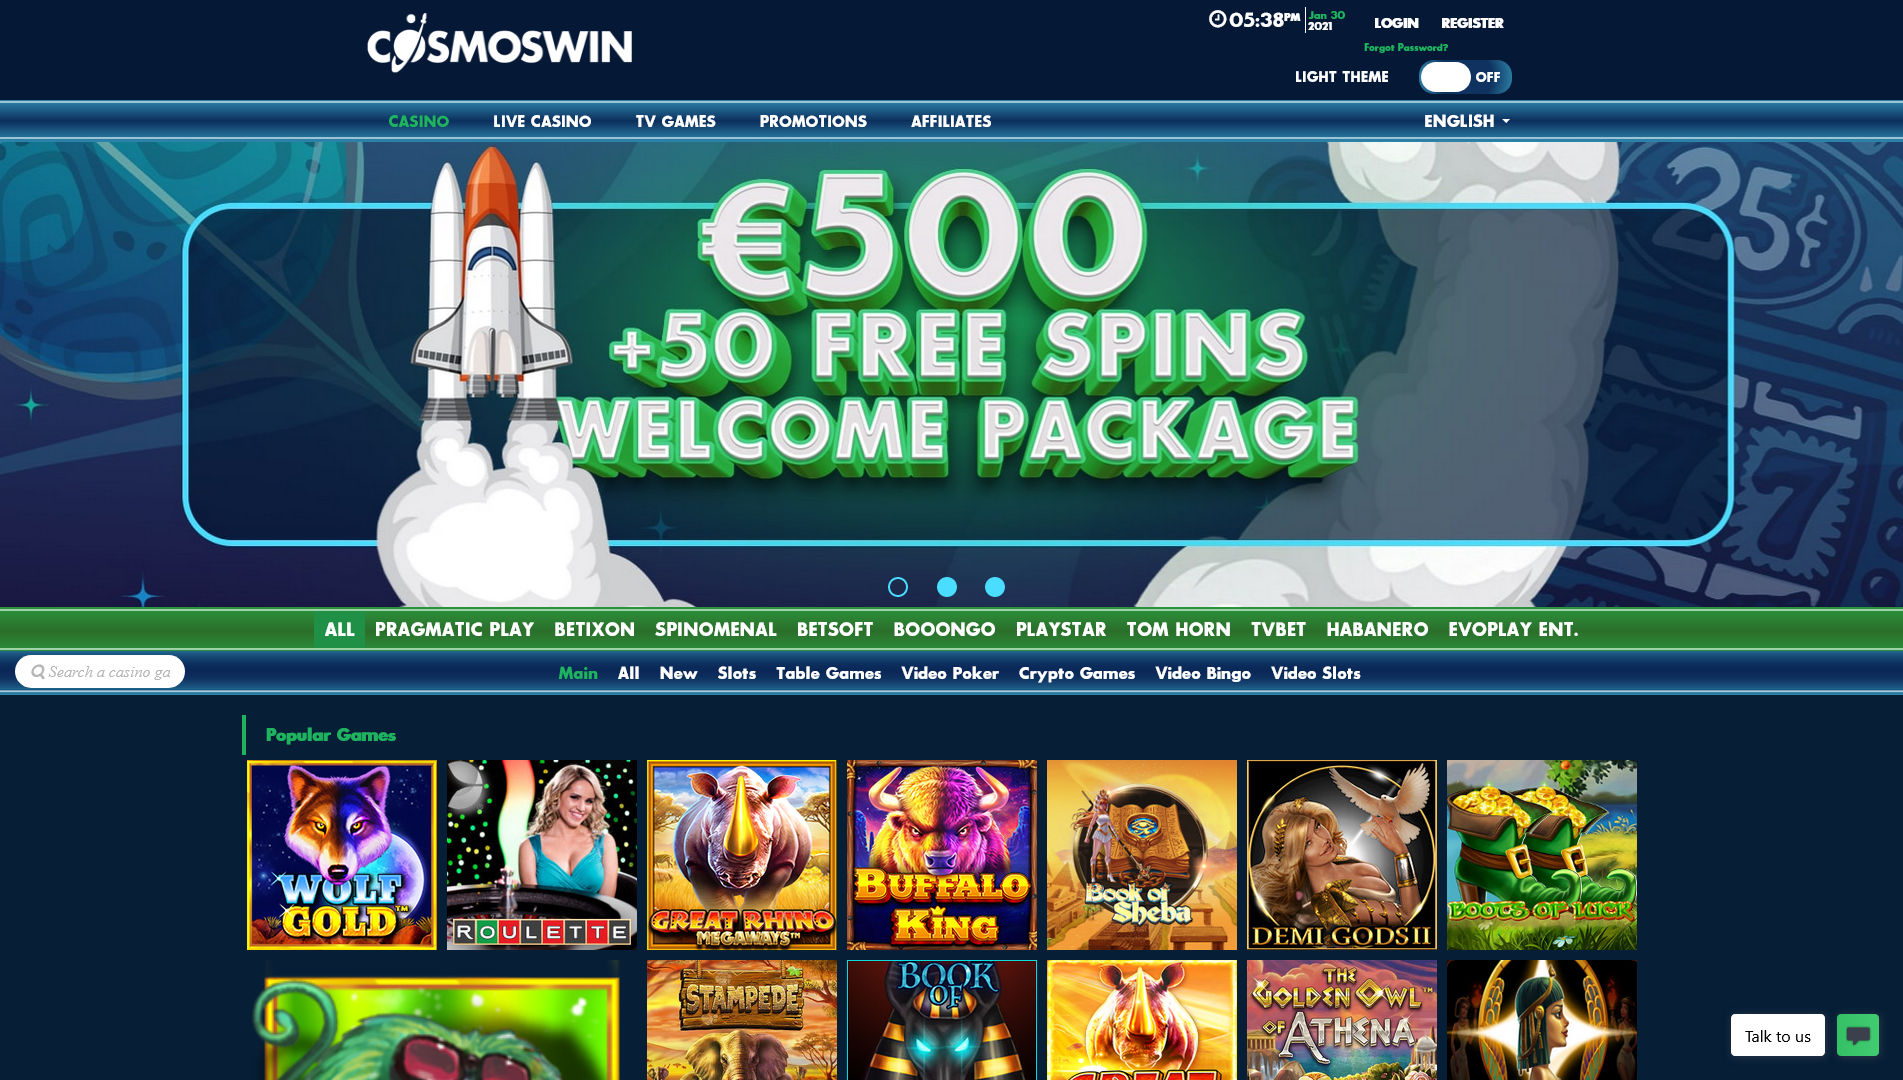 Cosmoswin Casino Review